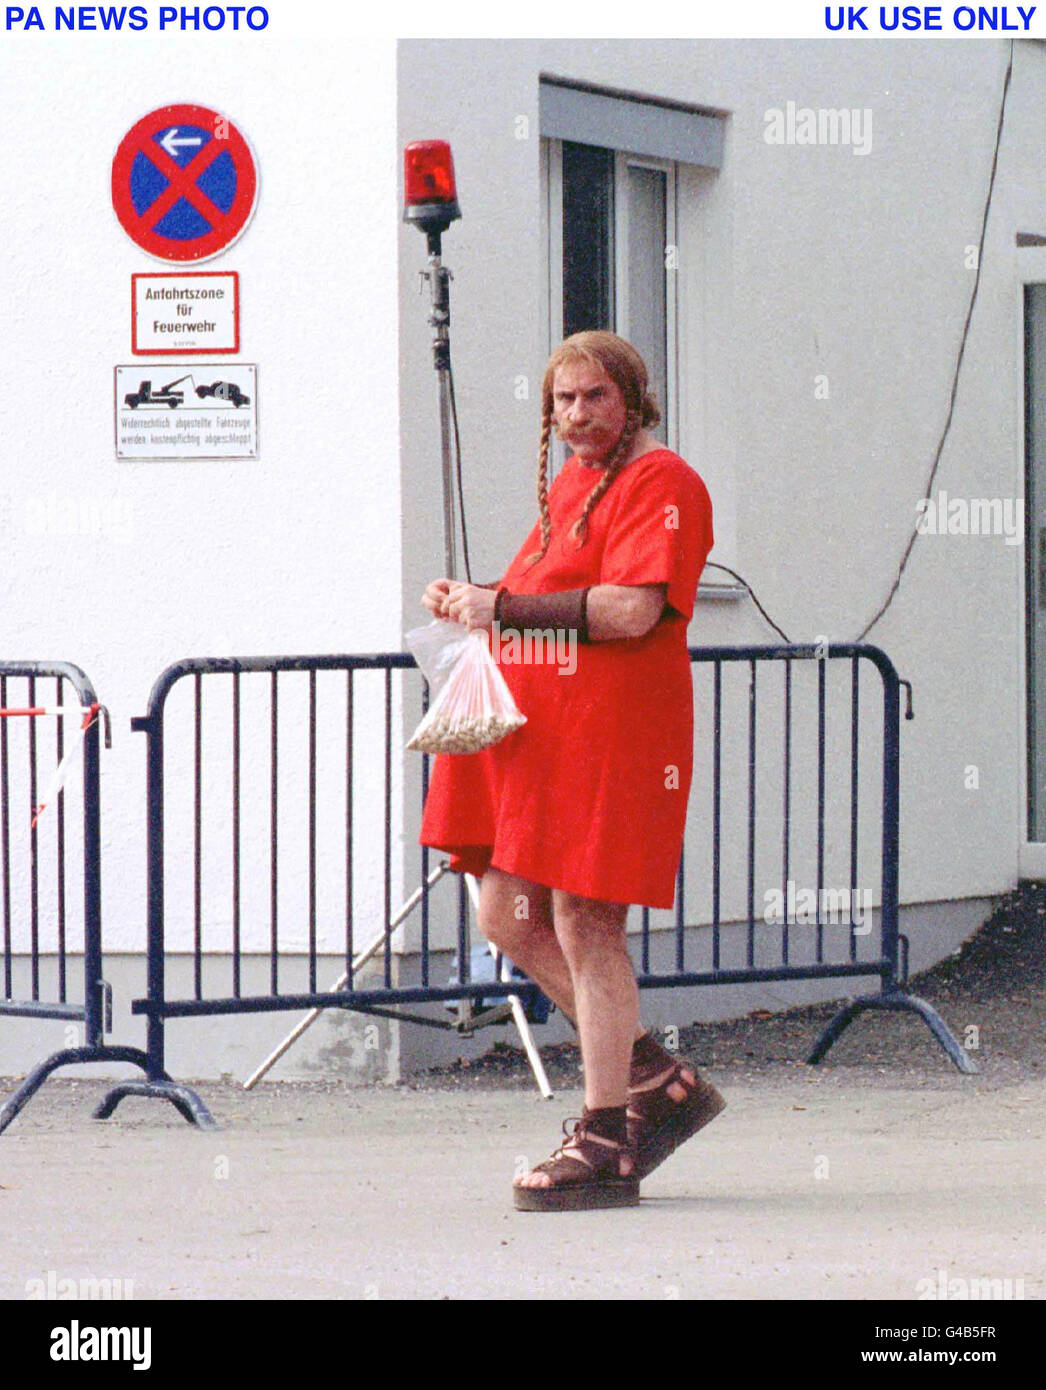 PA NEWS PHOTO : UK USE ONLY 13/2/98 GERARD DEPARDIEU IN COSTUME FOR THE FILMING OF 'ASTERIX AND OBELIX' AT STUDIOS GEISELGASTEID IN MUNICH, GERMANY Stock Photo